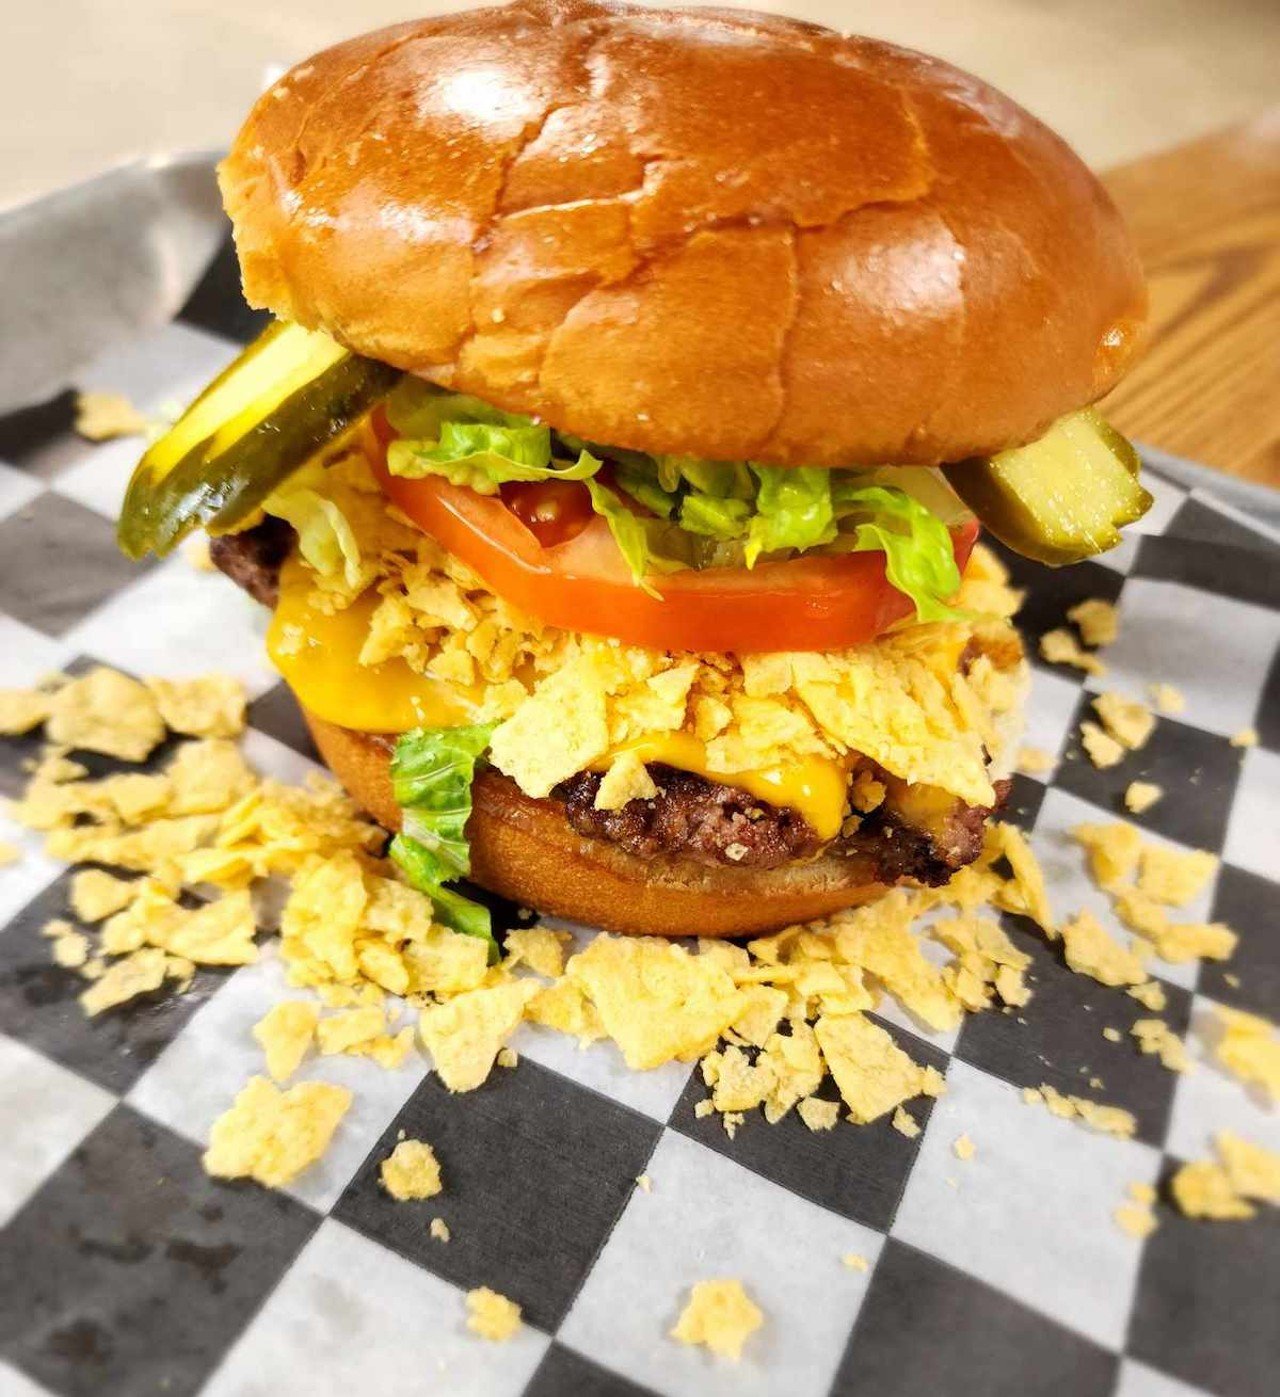 Four Mile Pig (Element Eatery)
5350 Medpace Way, Madisonville
Crunch Burger: A deluxe smash burger topped with crunchy chips.
Spicy Smash Burger: An Angus smash burger topped with lettuce, tomato, pickle and onion with Four Mile Pig’s signature pickled jalapeños.